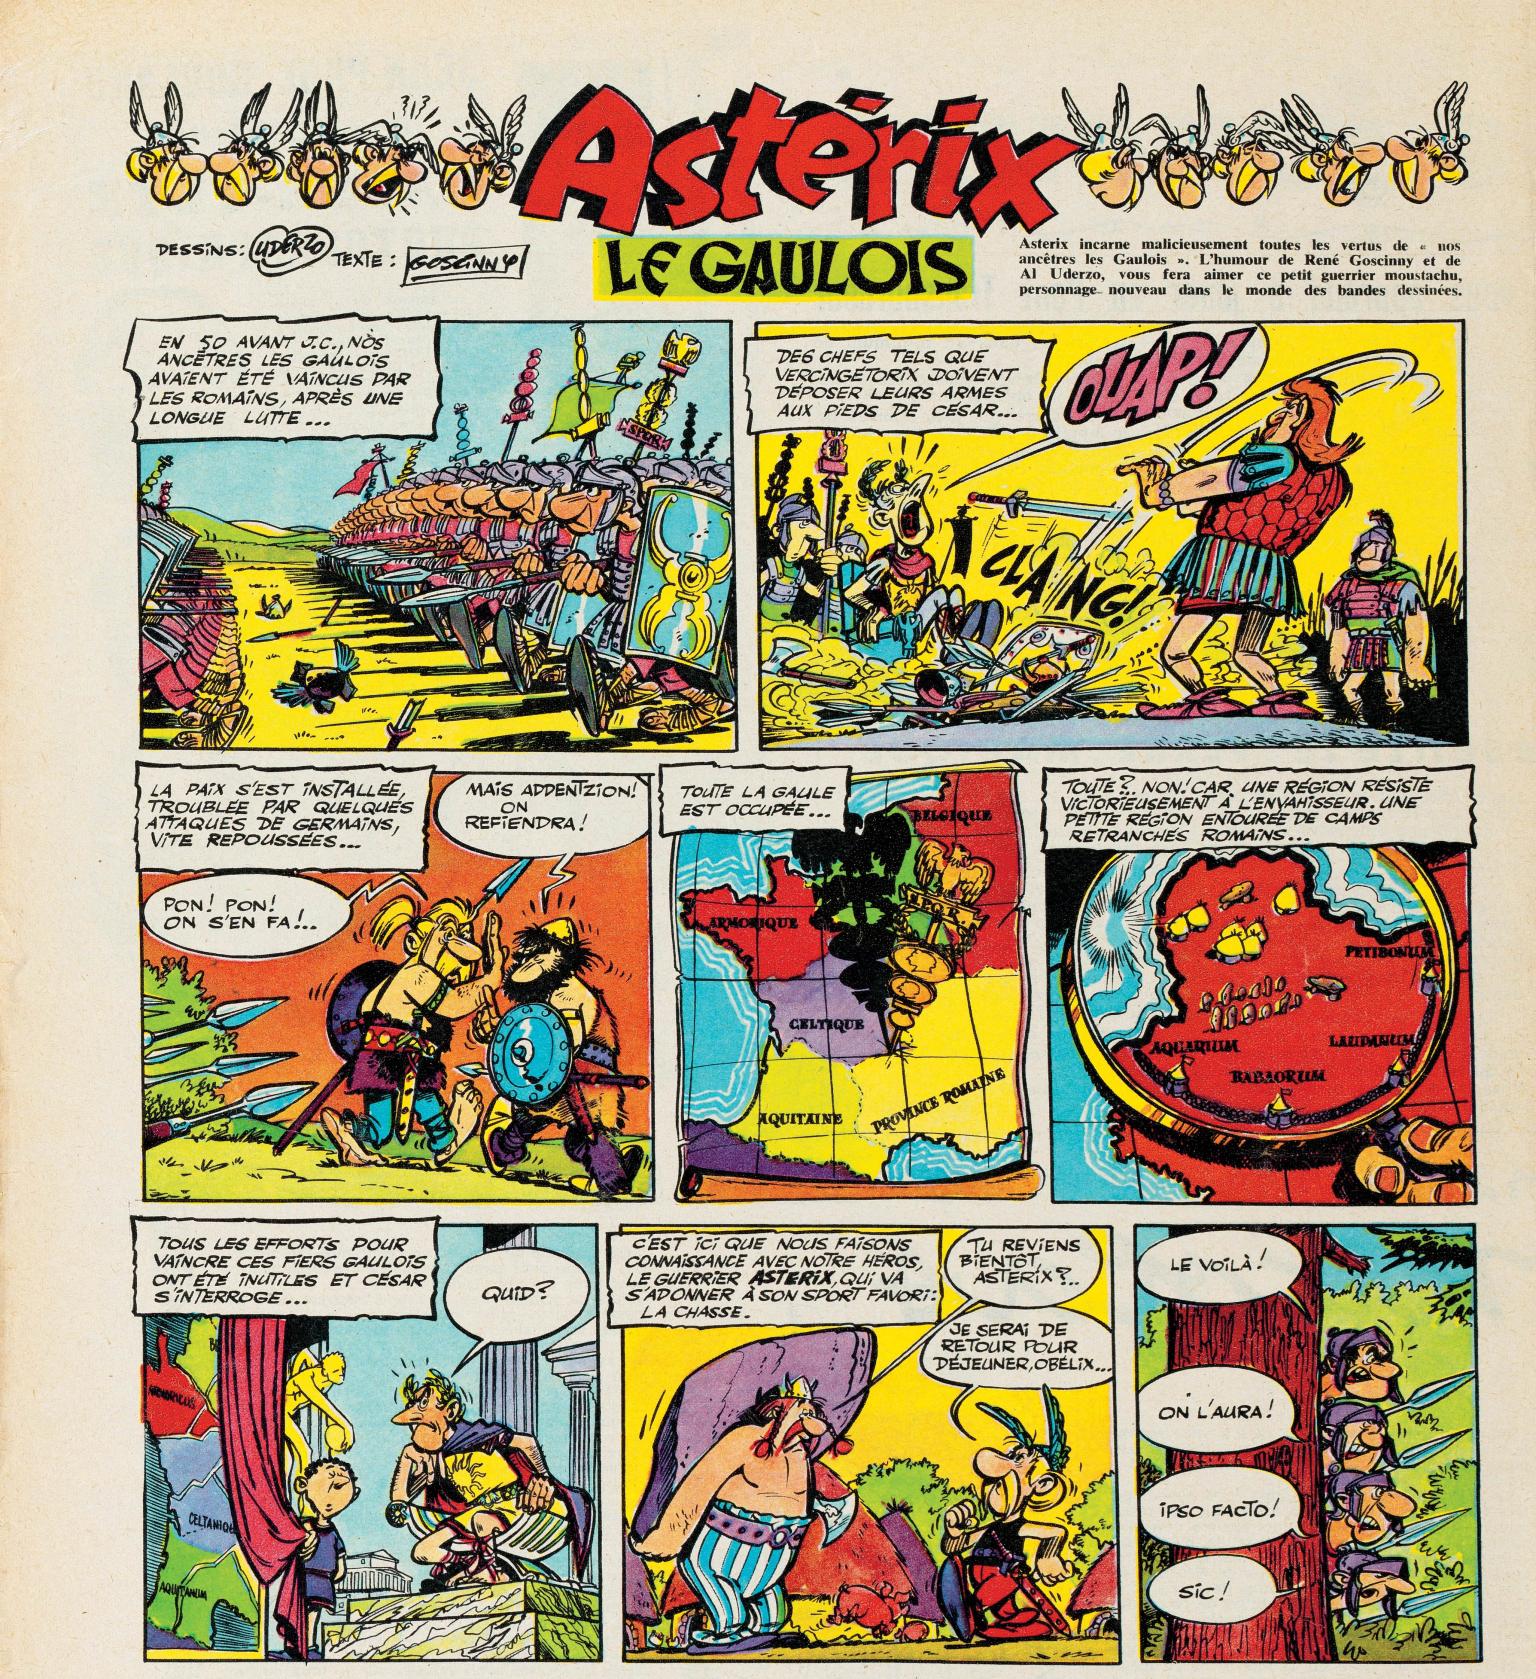 Comic strip featuring a title and heading across the top in French, and eight panels of comics below. The comics portray warriors, a man against several opponents, two warriors, a stylized map of France, a map of enemy tents, a warrior on a chair interrupted by a boy, two warriors talking, and four warriors talking while hiding behind a tree. 